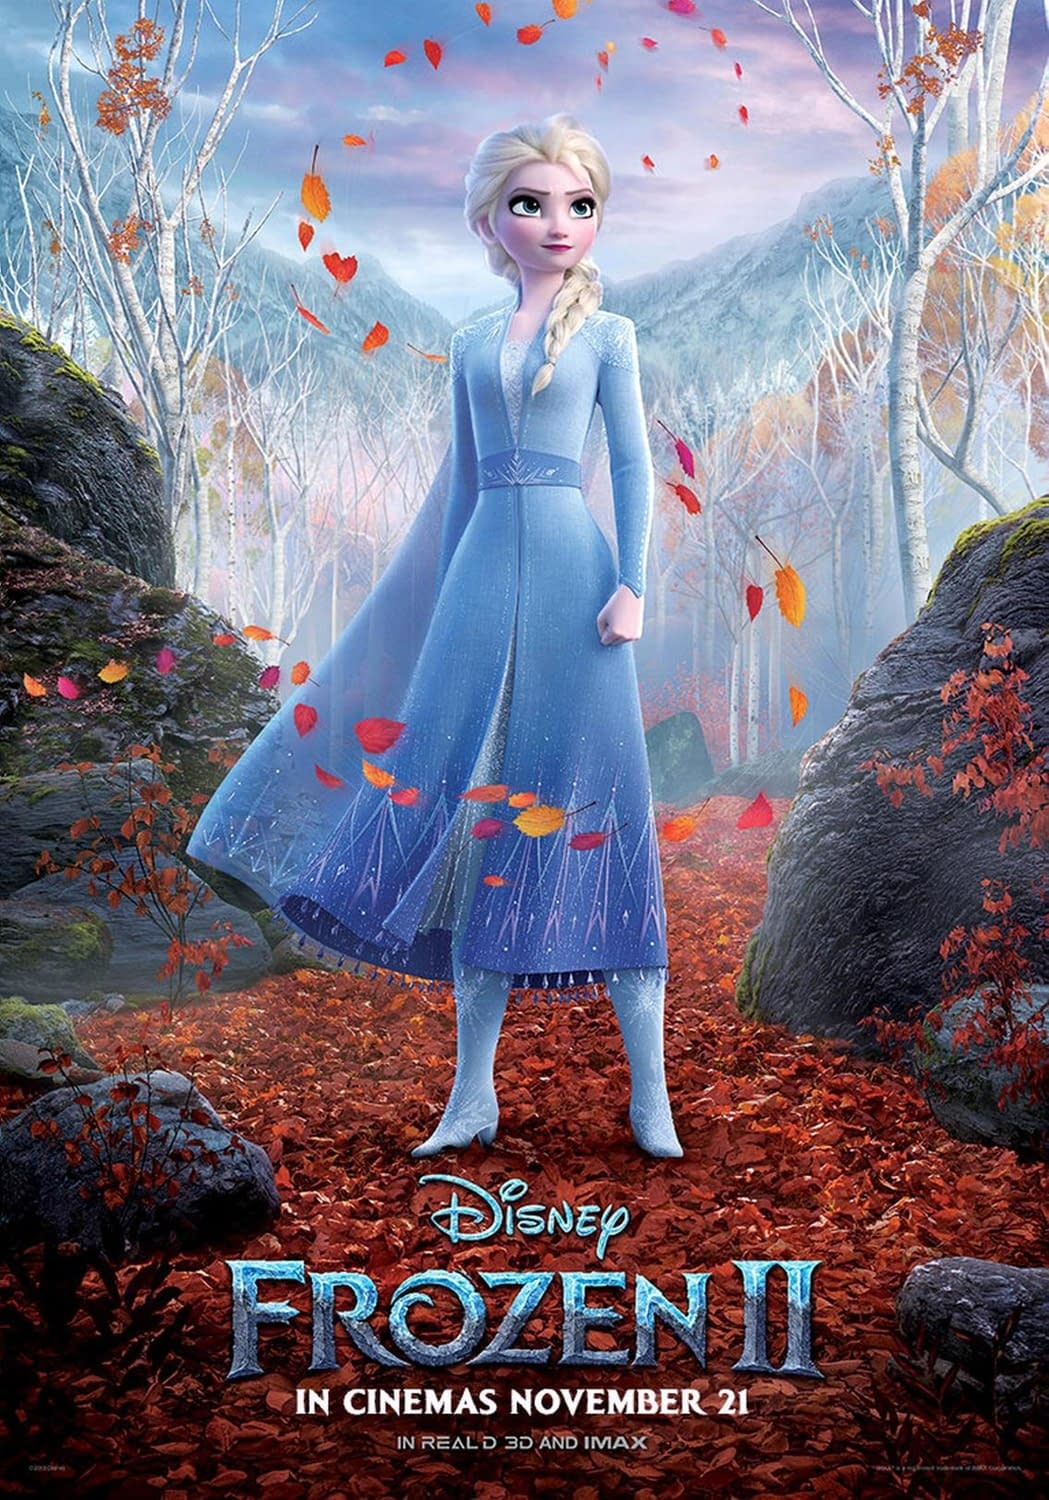 The Cast of "Frozen 2" Talks Reuniting Plus More Character Posters